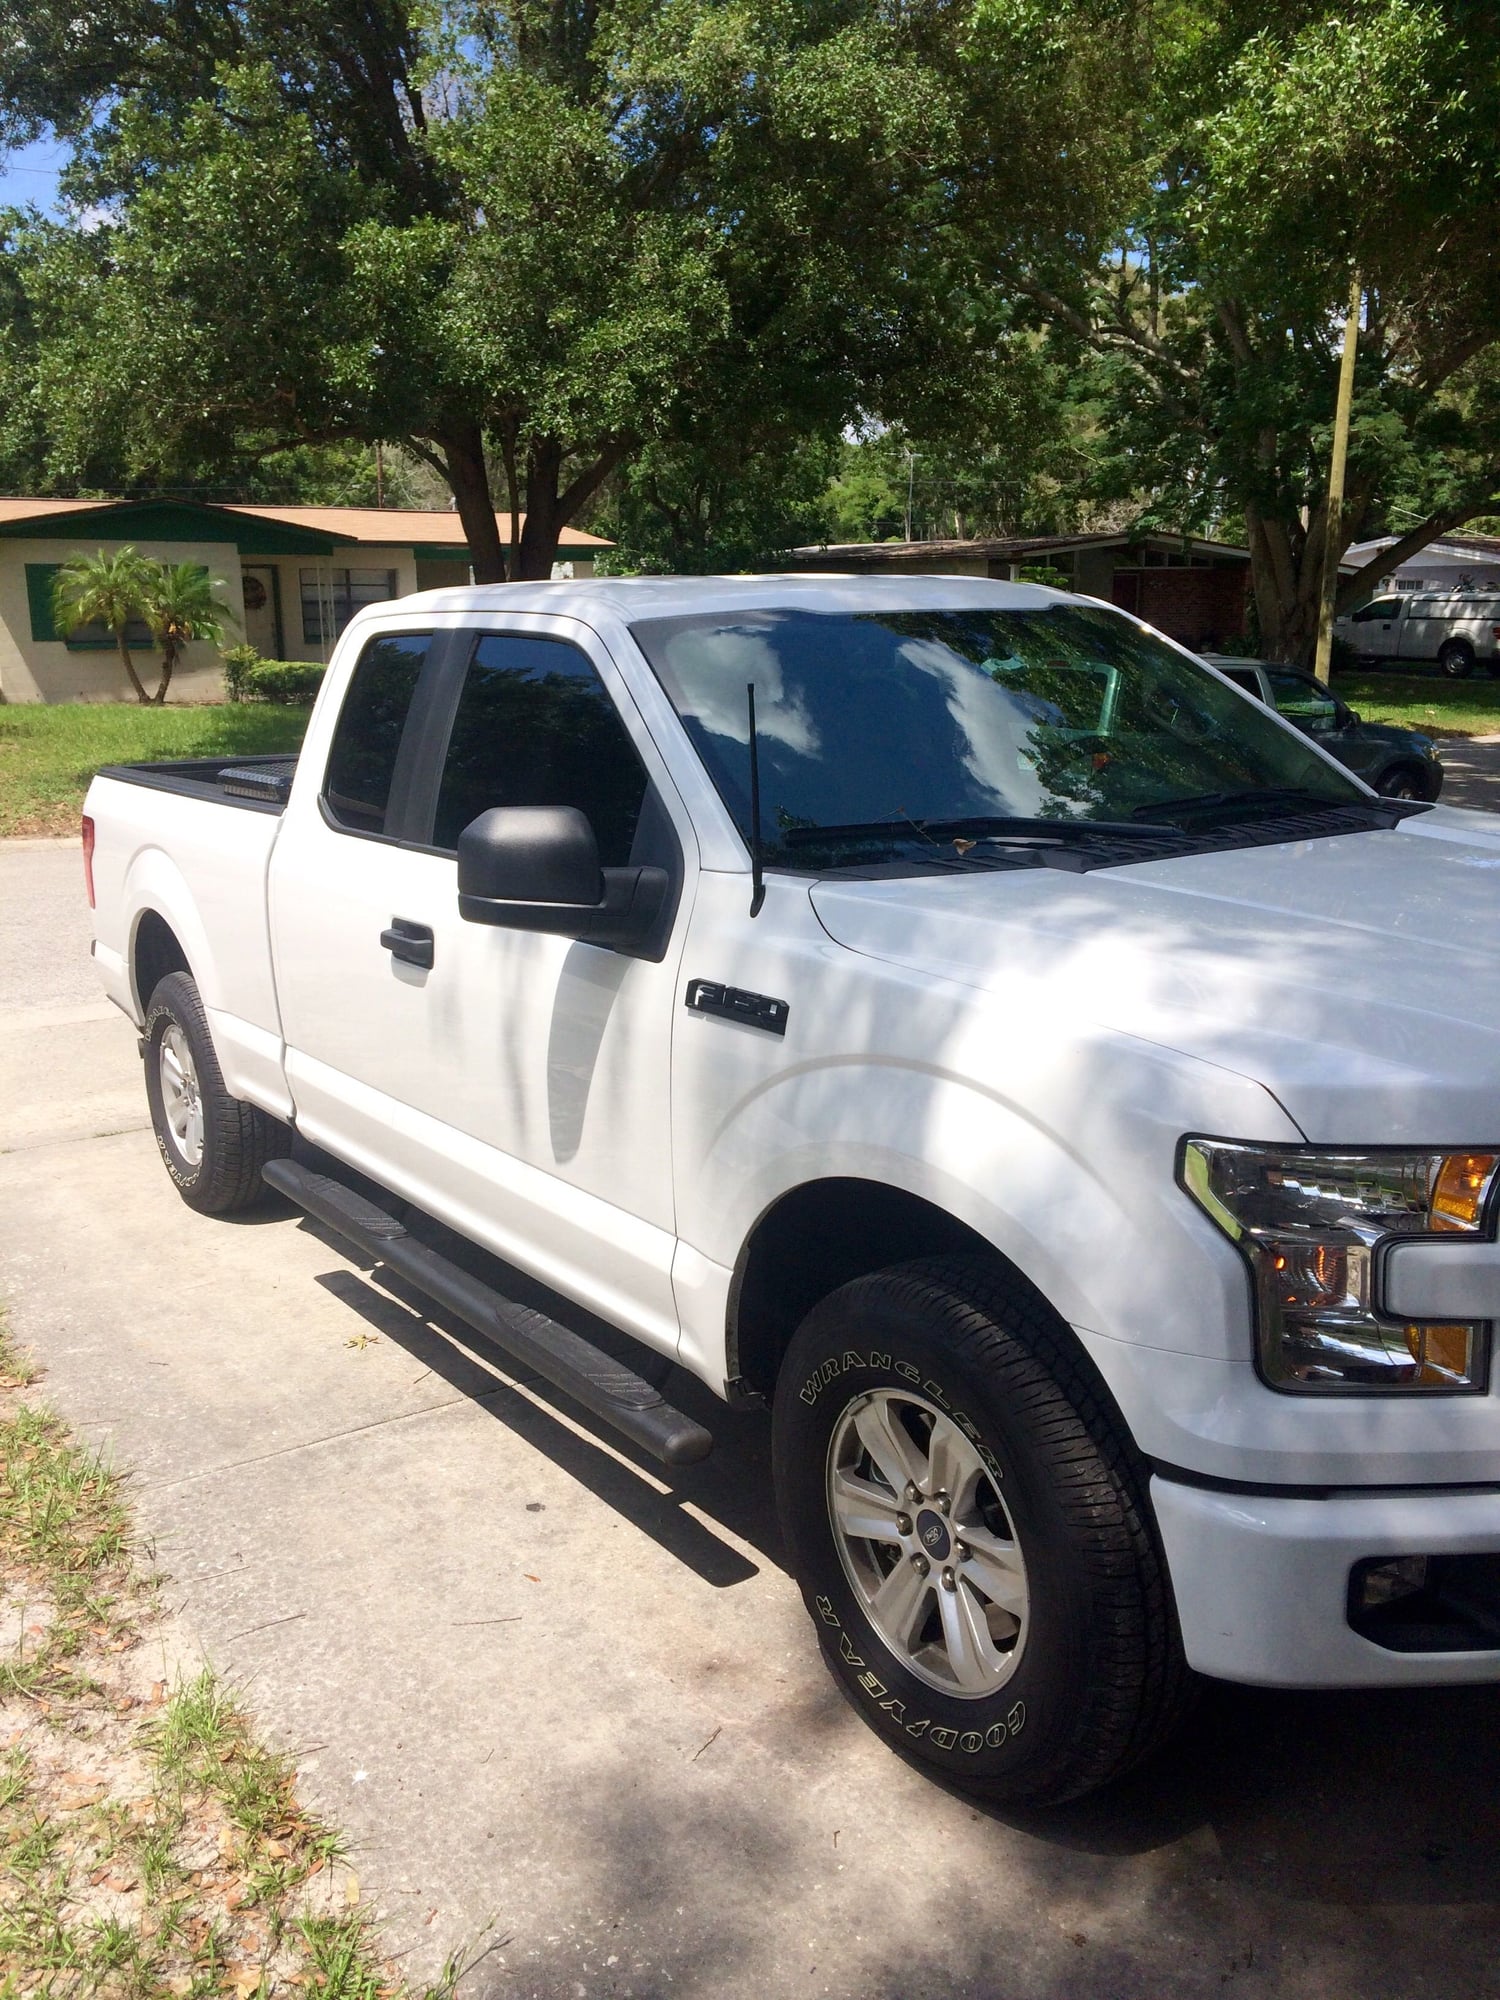 2015 F150 Owner Picture Thread - Page 90 - Ford F150 Forum - Community